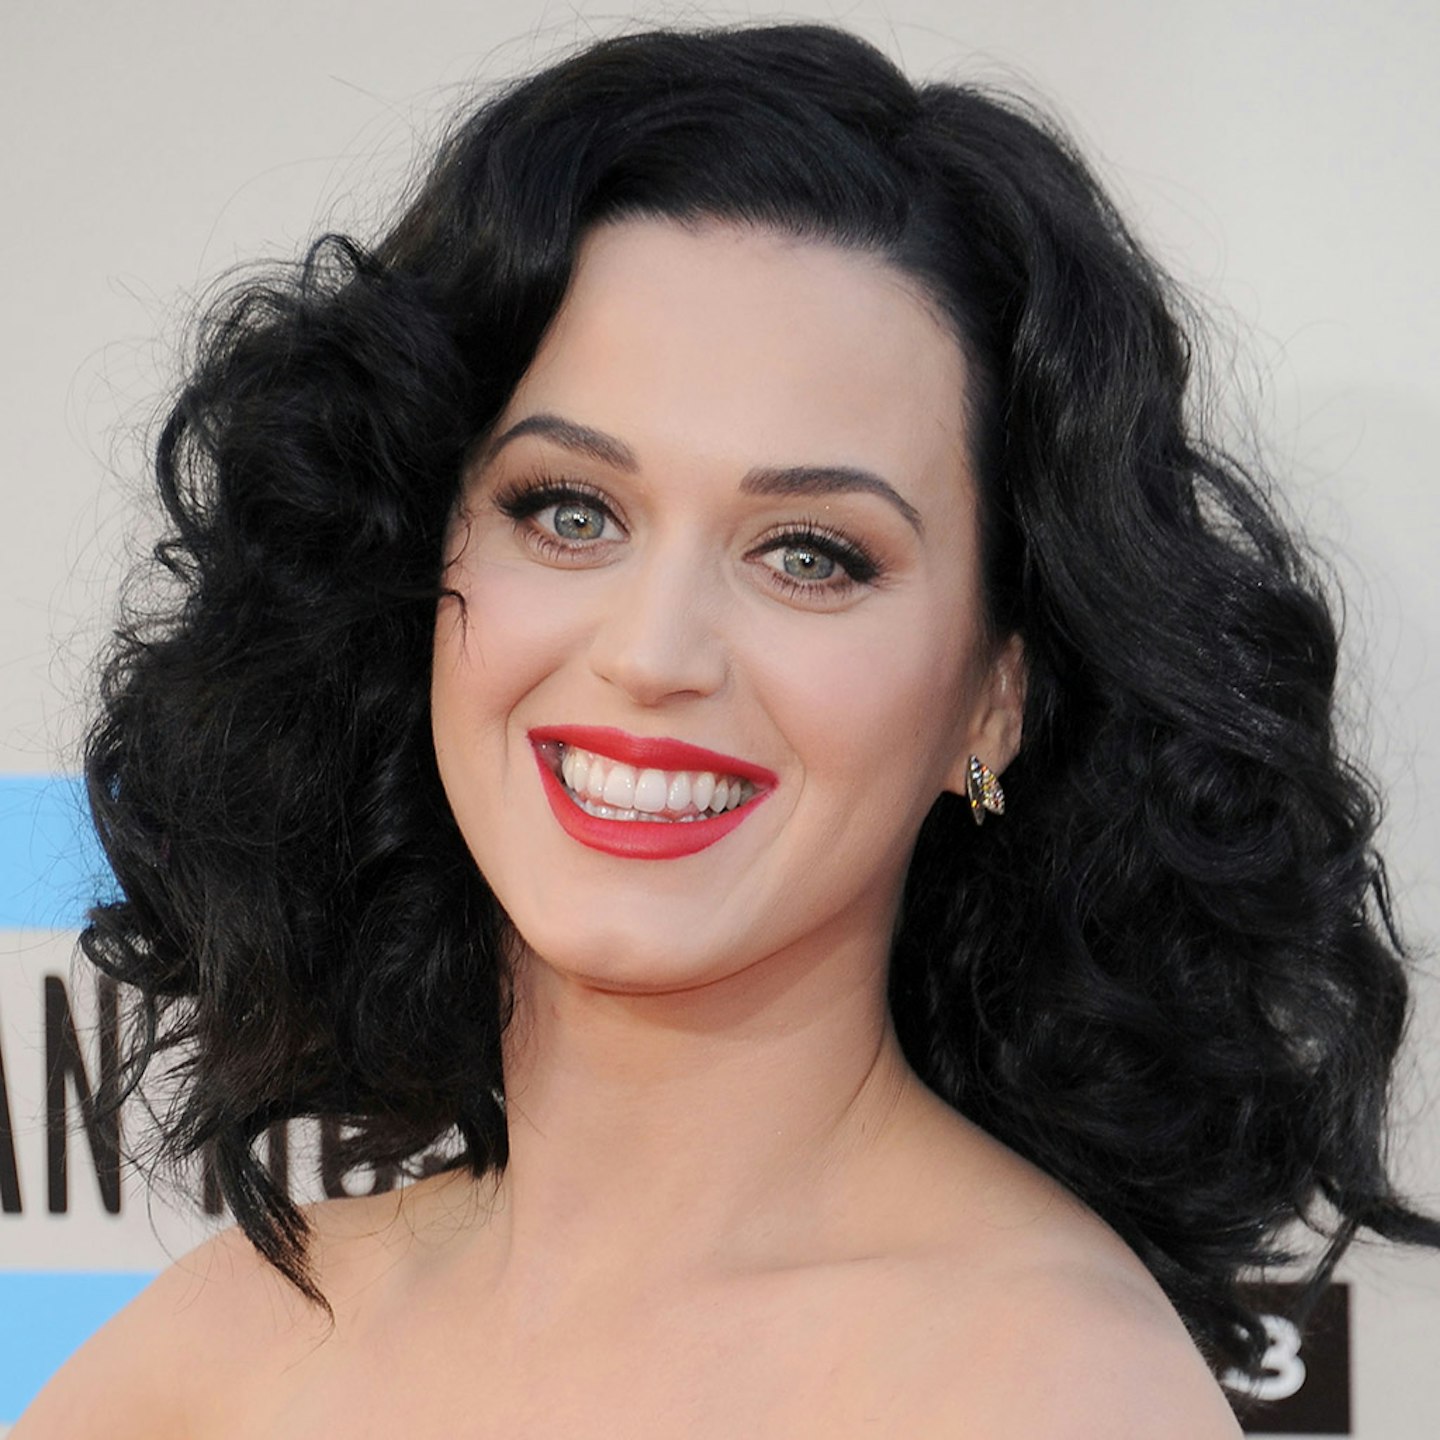 Katy Perry curly hair, 2013